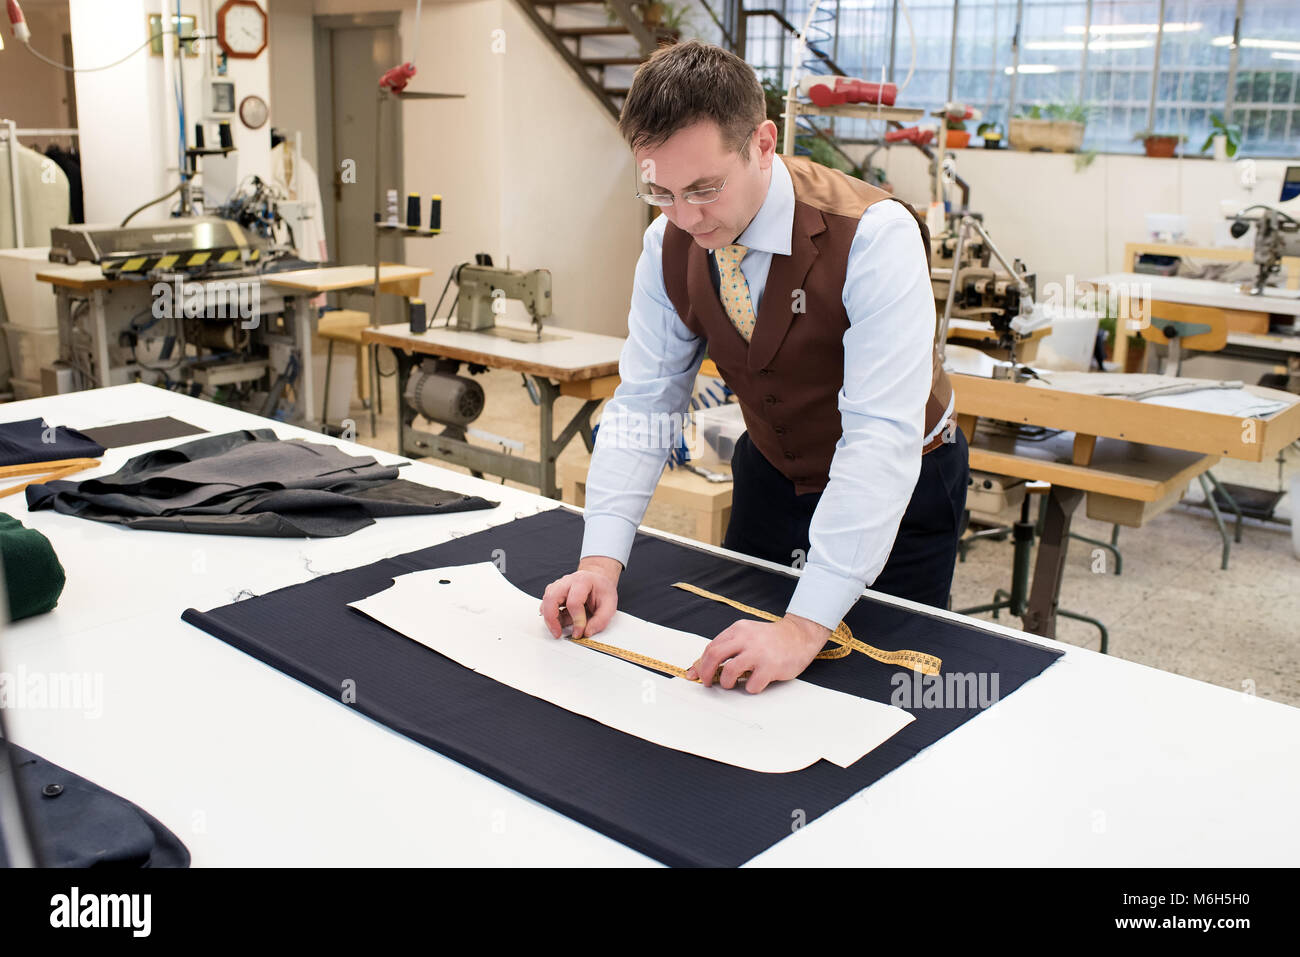 Tailor working over paper pattern of jacket in workshop Stock Photo